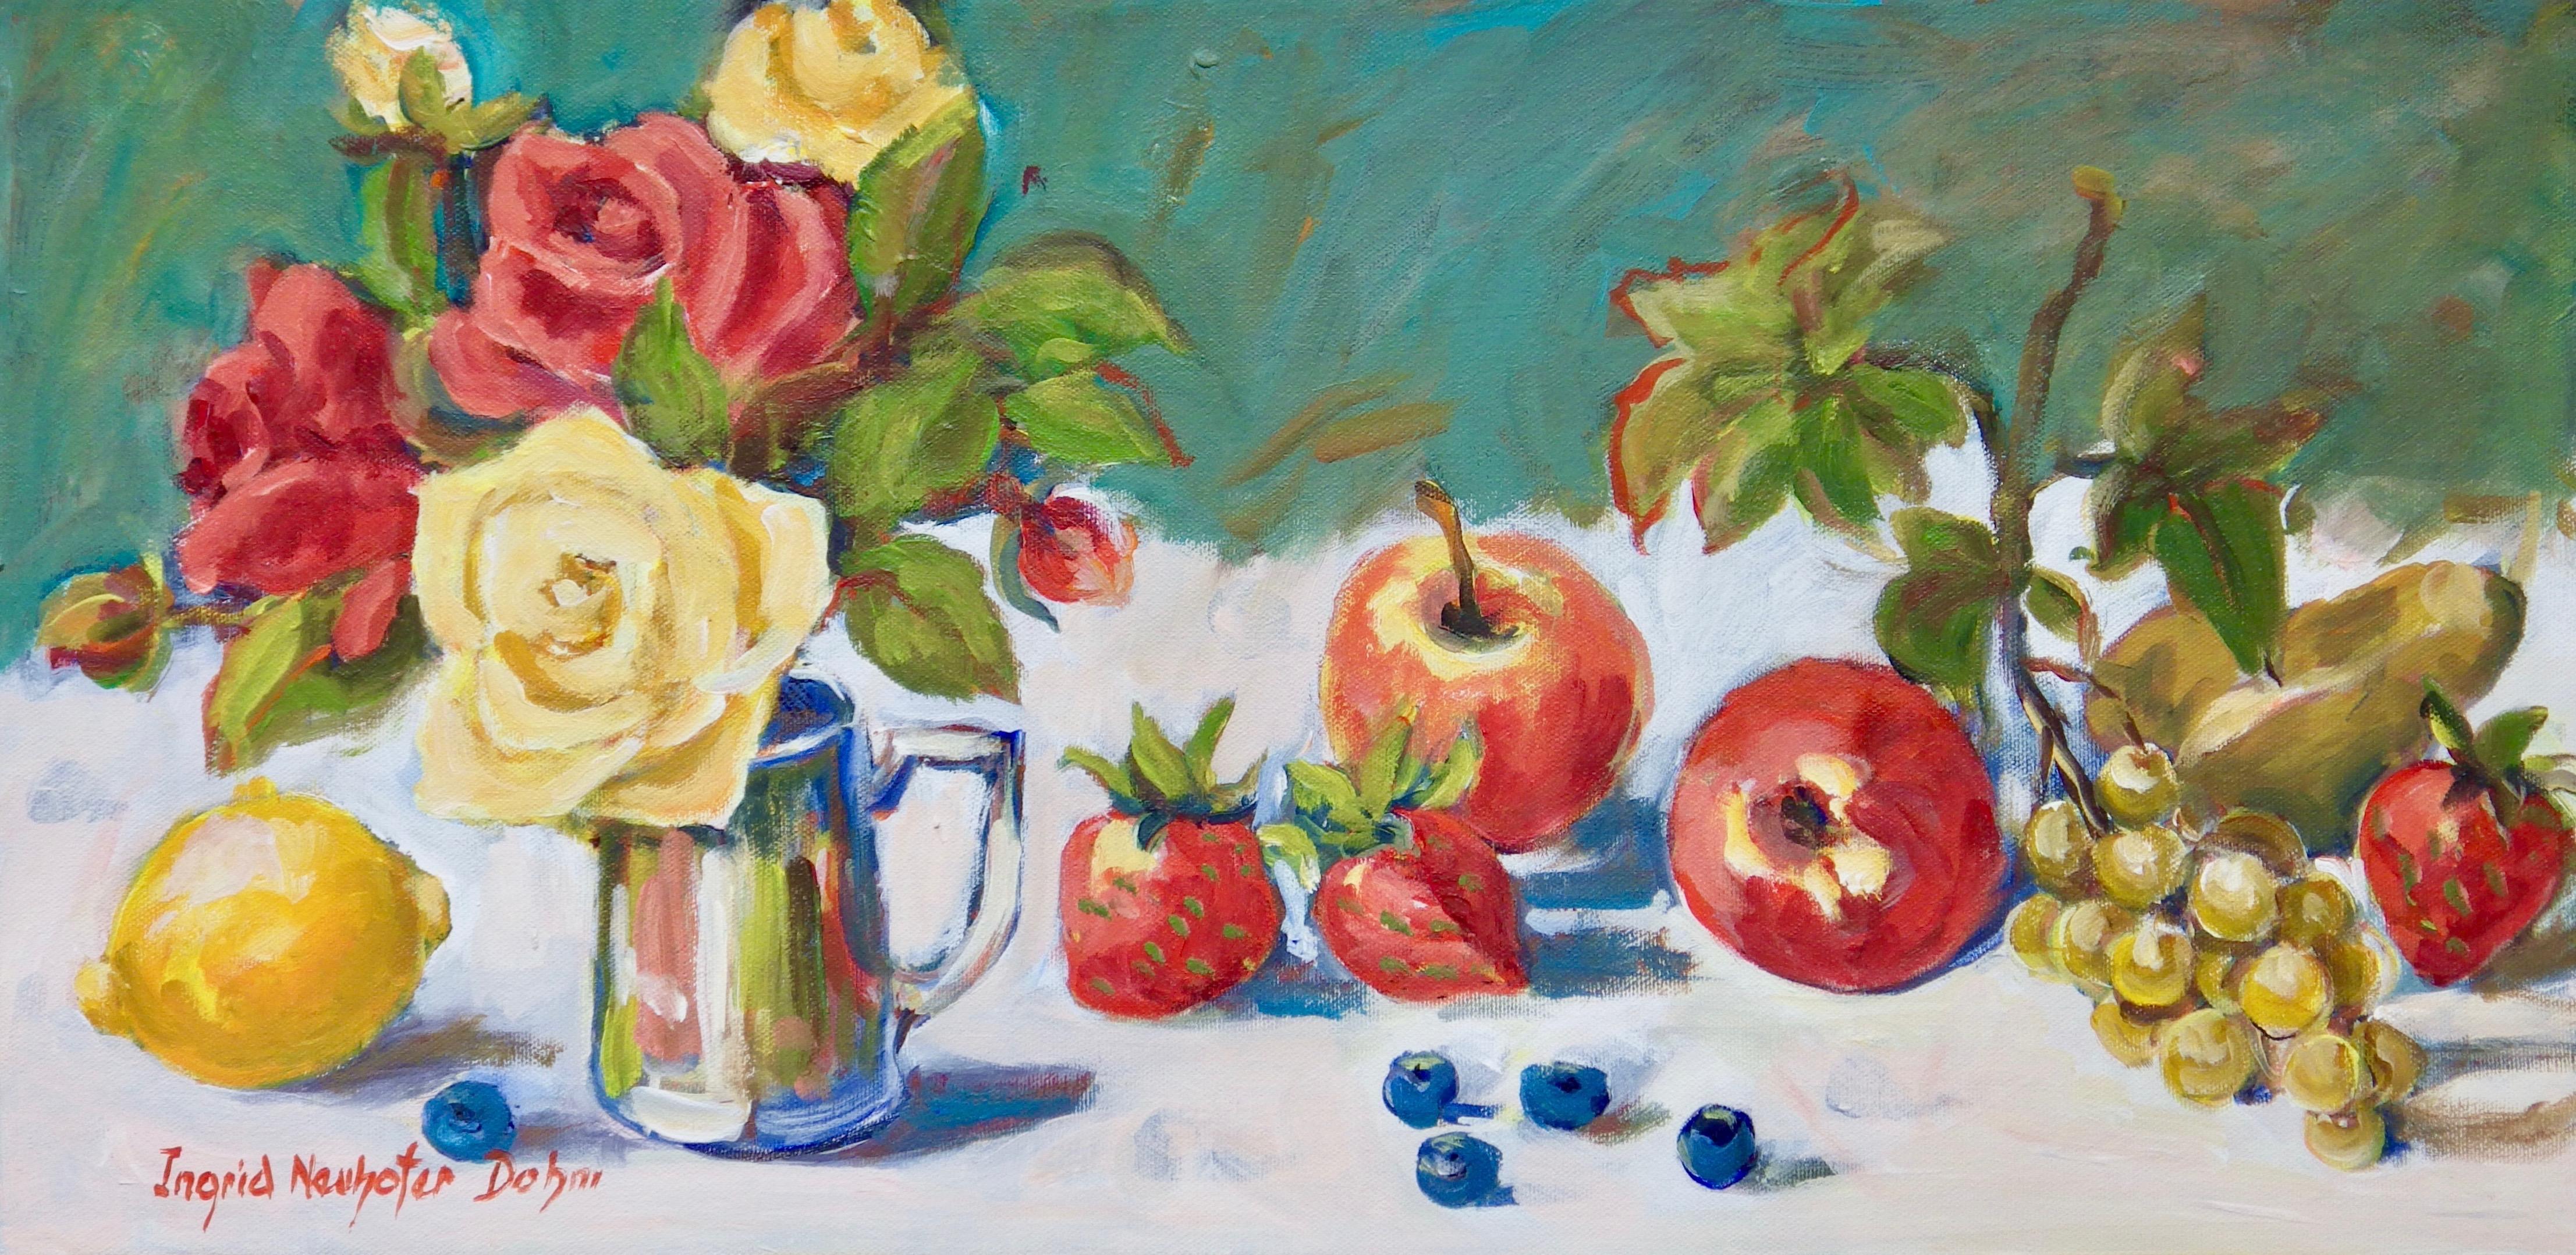 Ingrid Dohm Still-Life Painting - Floral Still Life with Fruit, Original Acrylic Painting, 2018